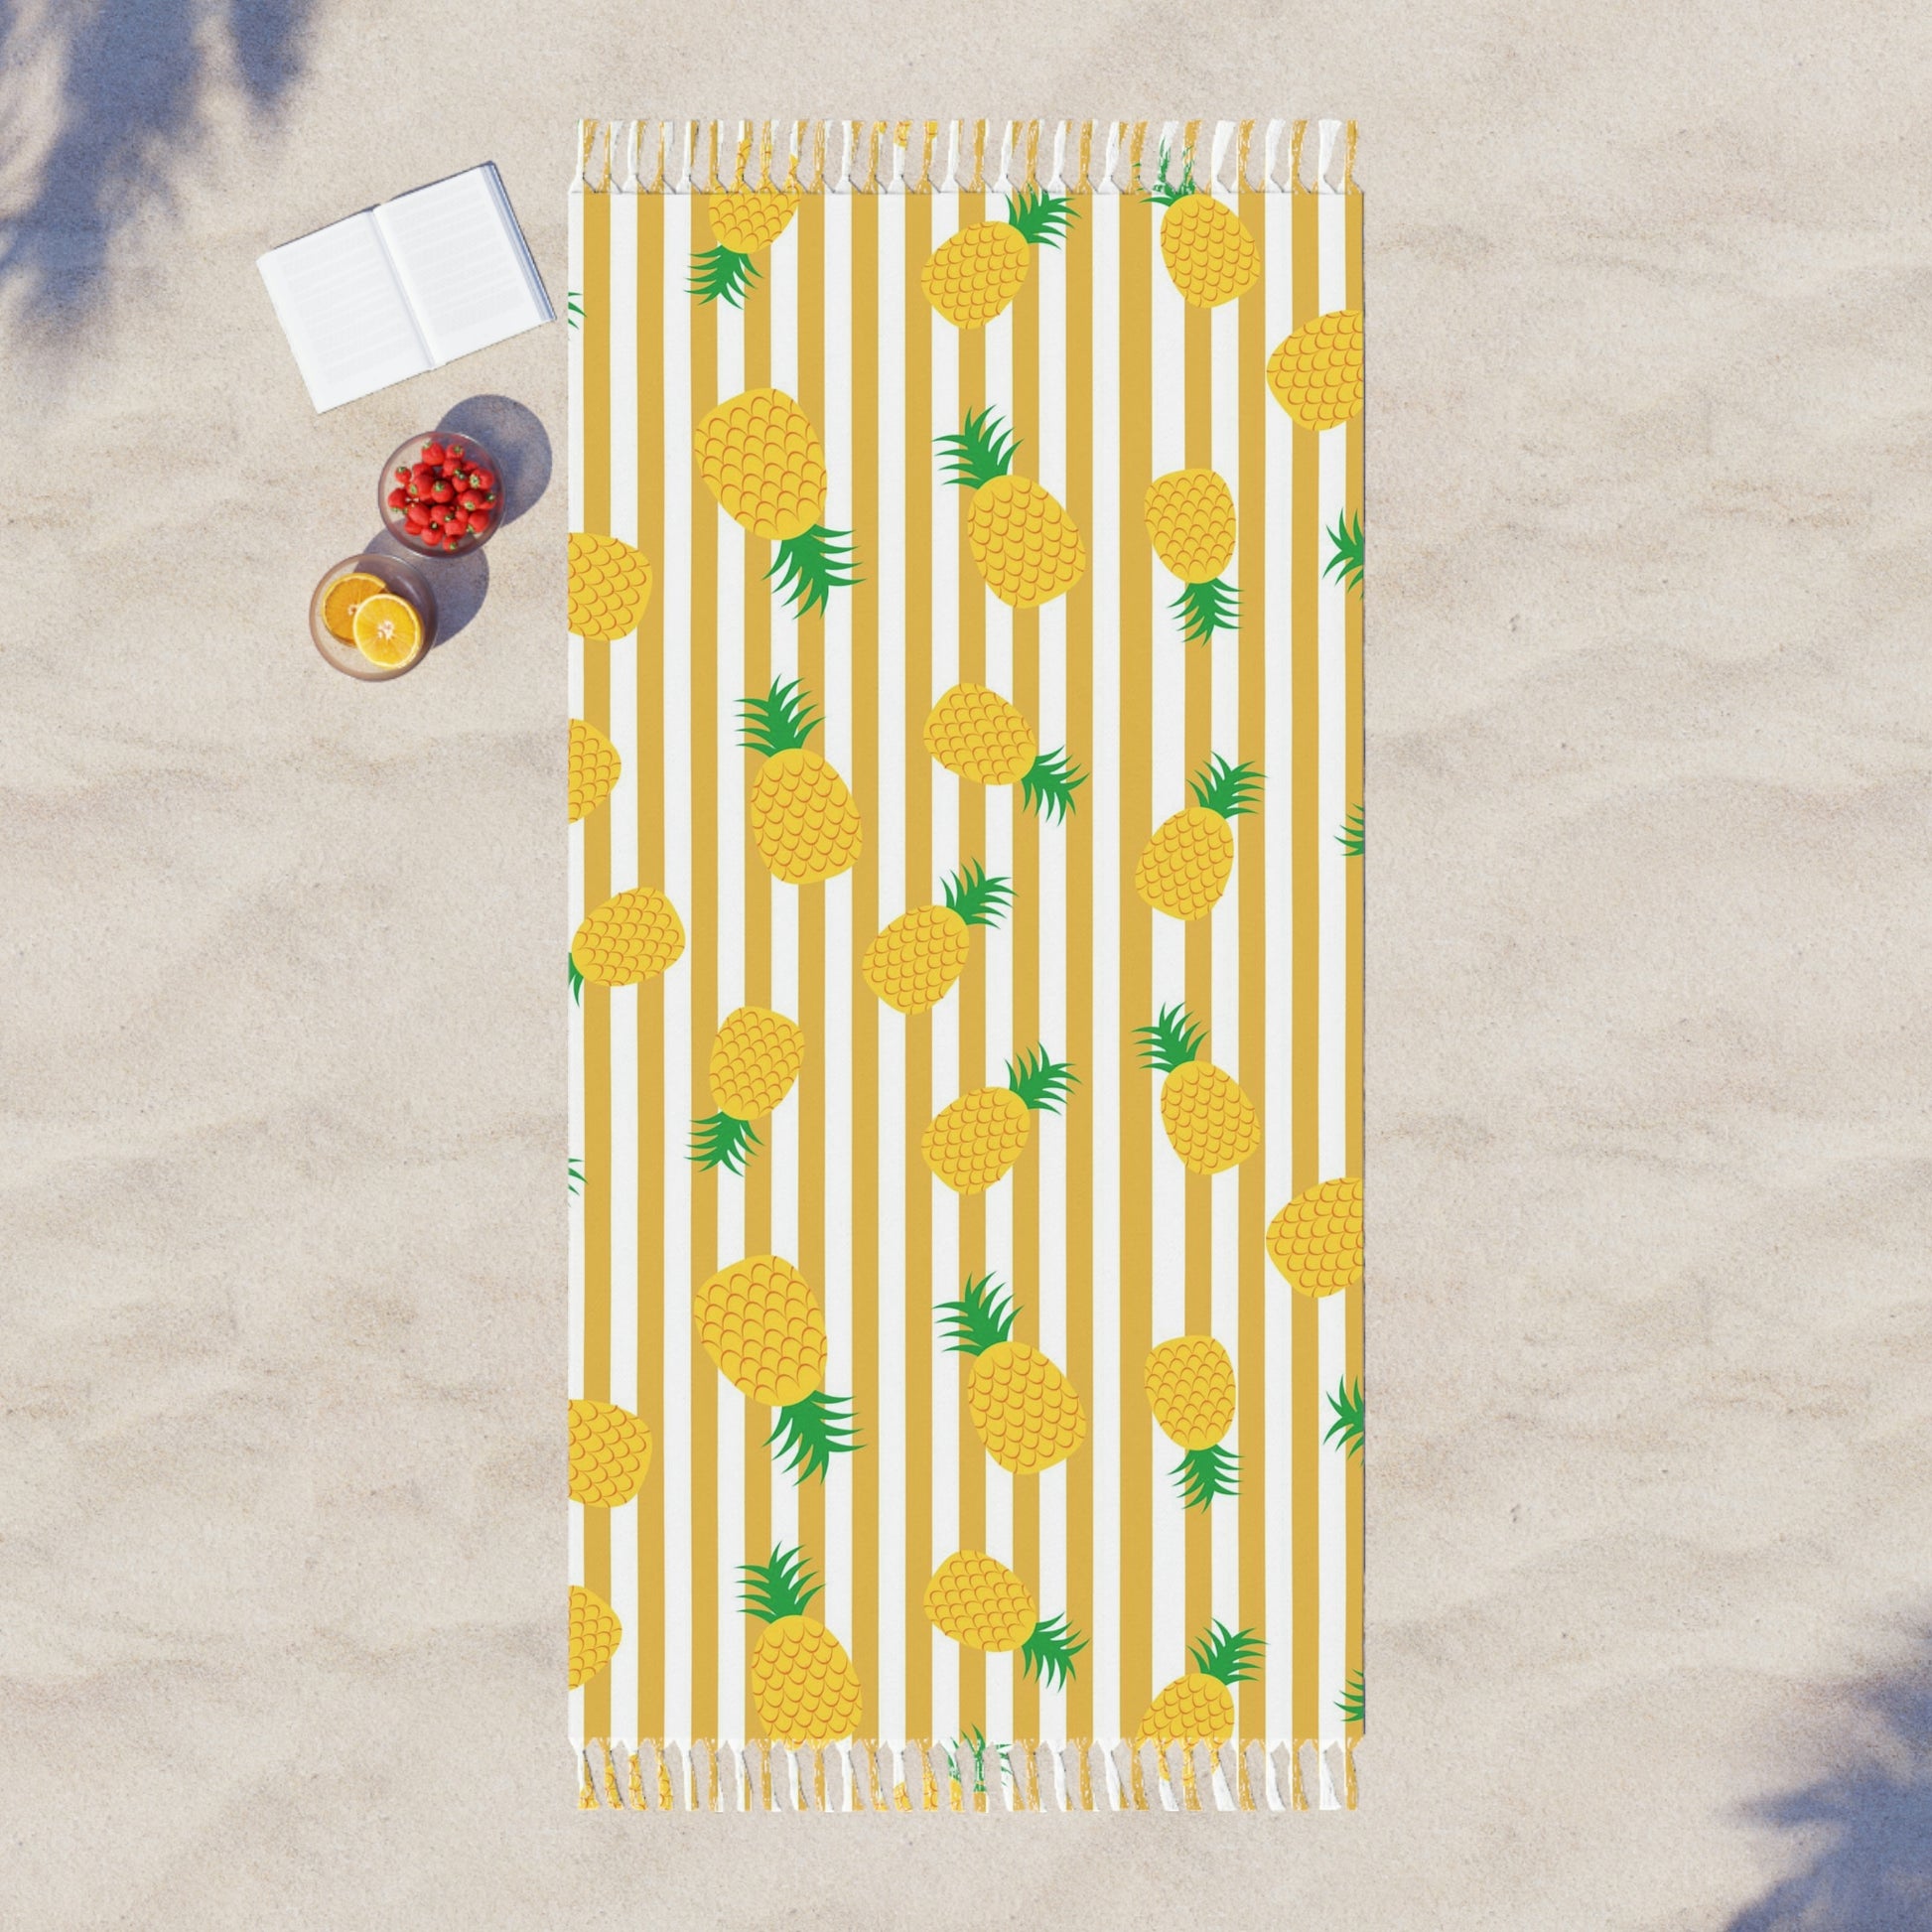 Pineapple Boho Beach Towel with Tassels, Striped Retro Woven Cloth Cover Up Large Pool Festival Sun Outdoor Oversized Blanket Starcove Fashion